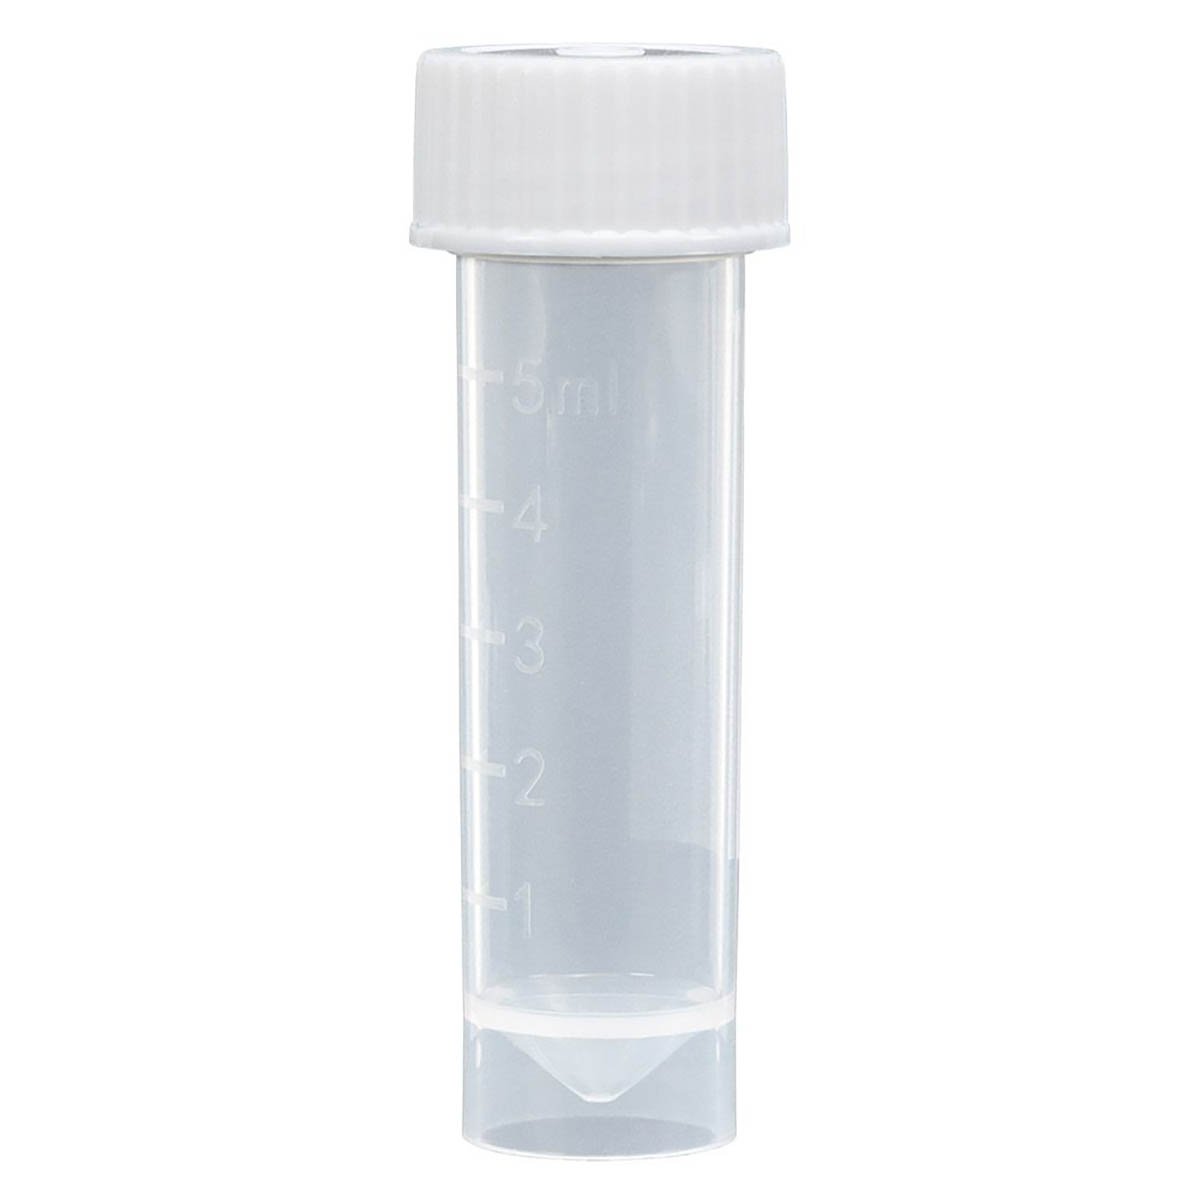 Transport Tubes 5mL - PP Self-Standing Conical Bottom with Attached PE White Screw Cap - STERILE (Case of 500)